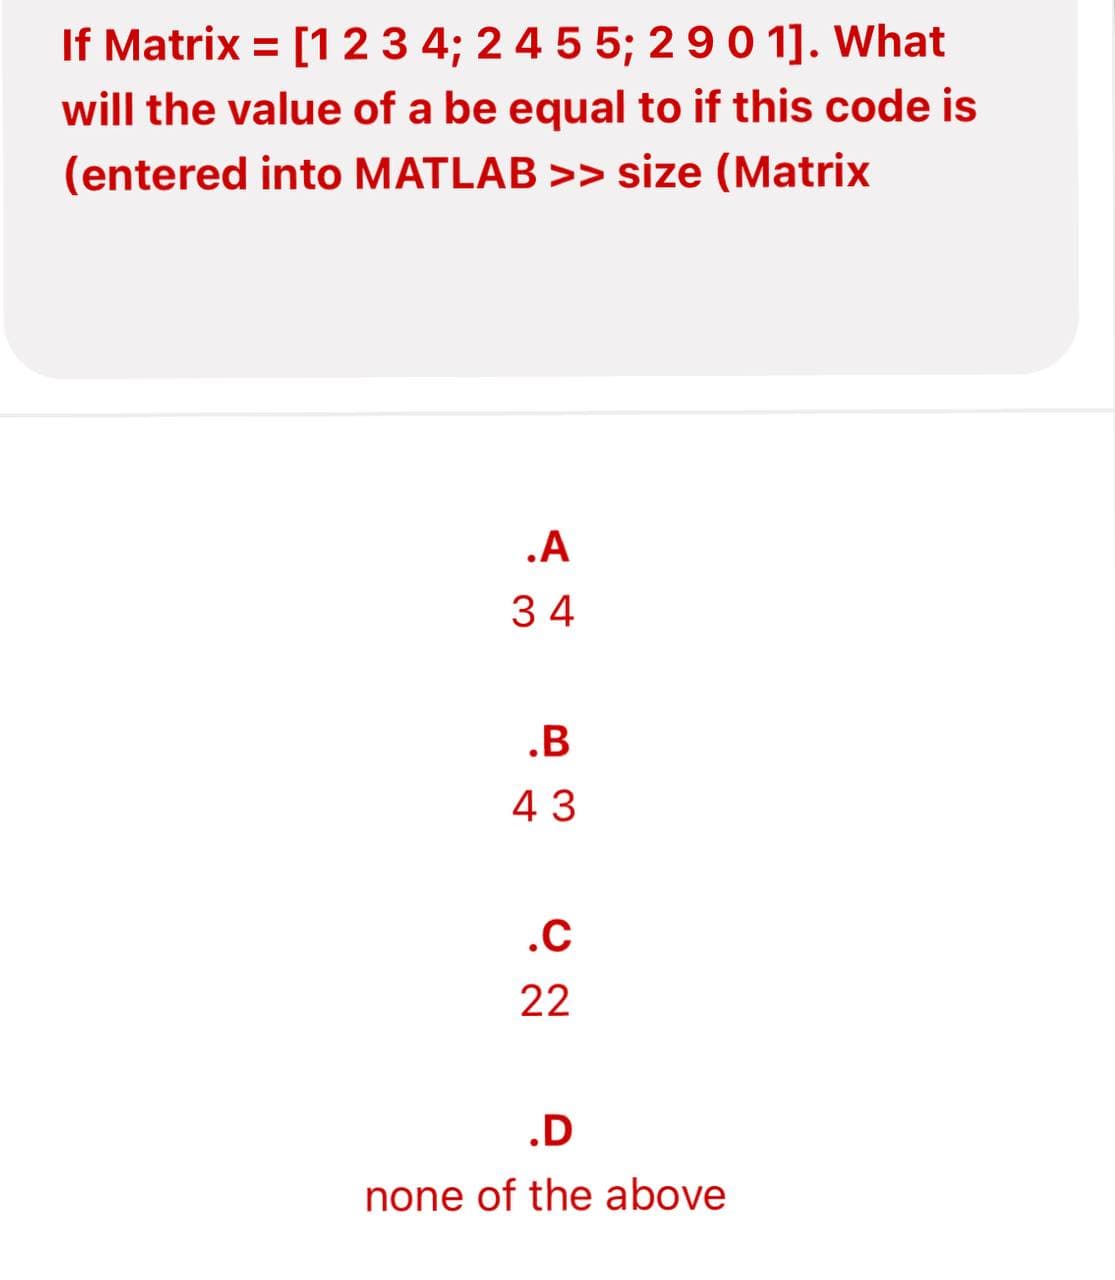 If Matrix = [1 2 3 4; 2 4 5 5; 2 9 0 1]. What
will the value of a be equal to if this code is
(entered into MATLAB >> size (Matrix
.A
34
.B
43
.C
22
.D
none of the above